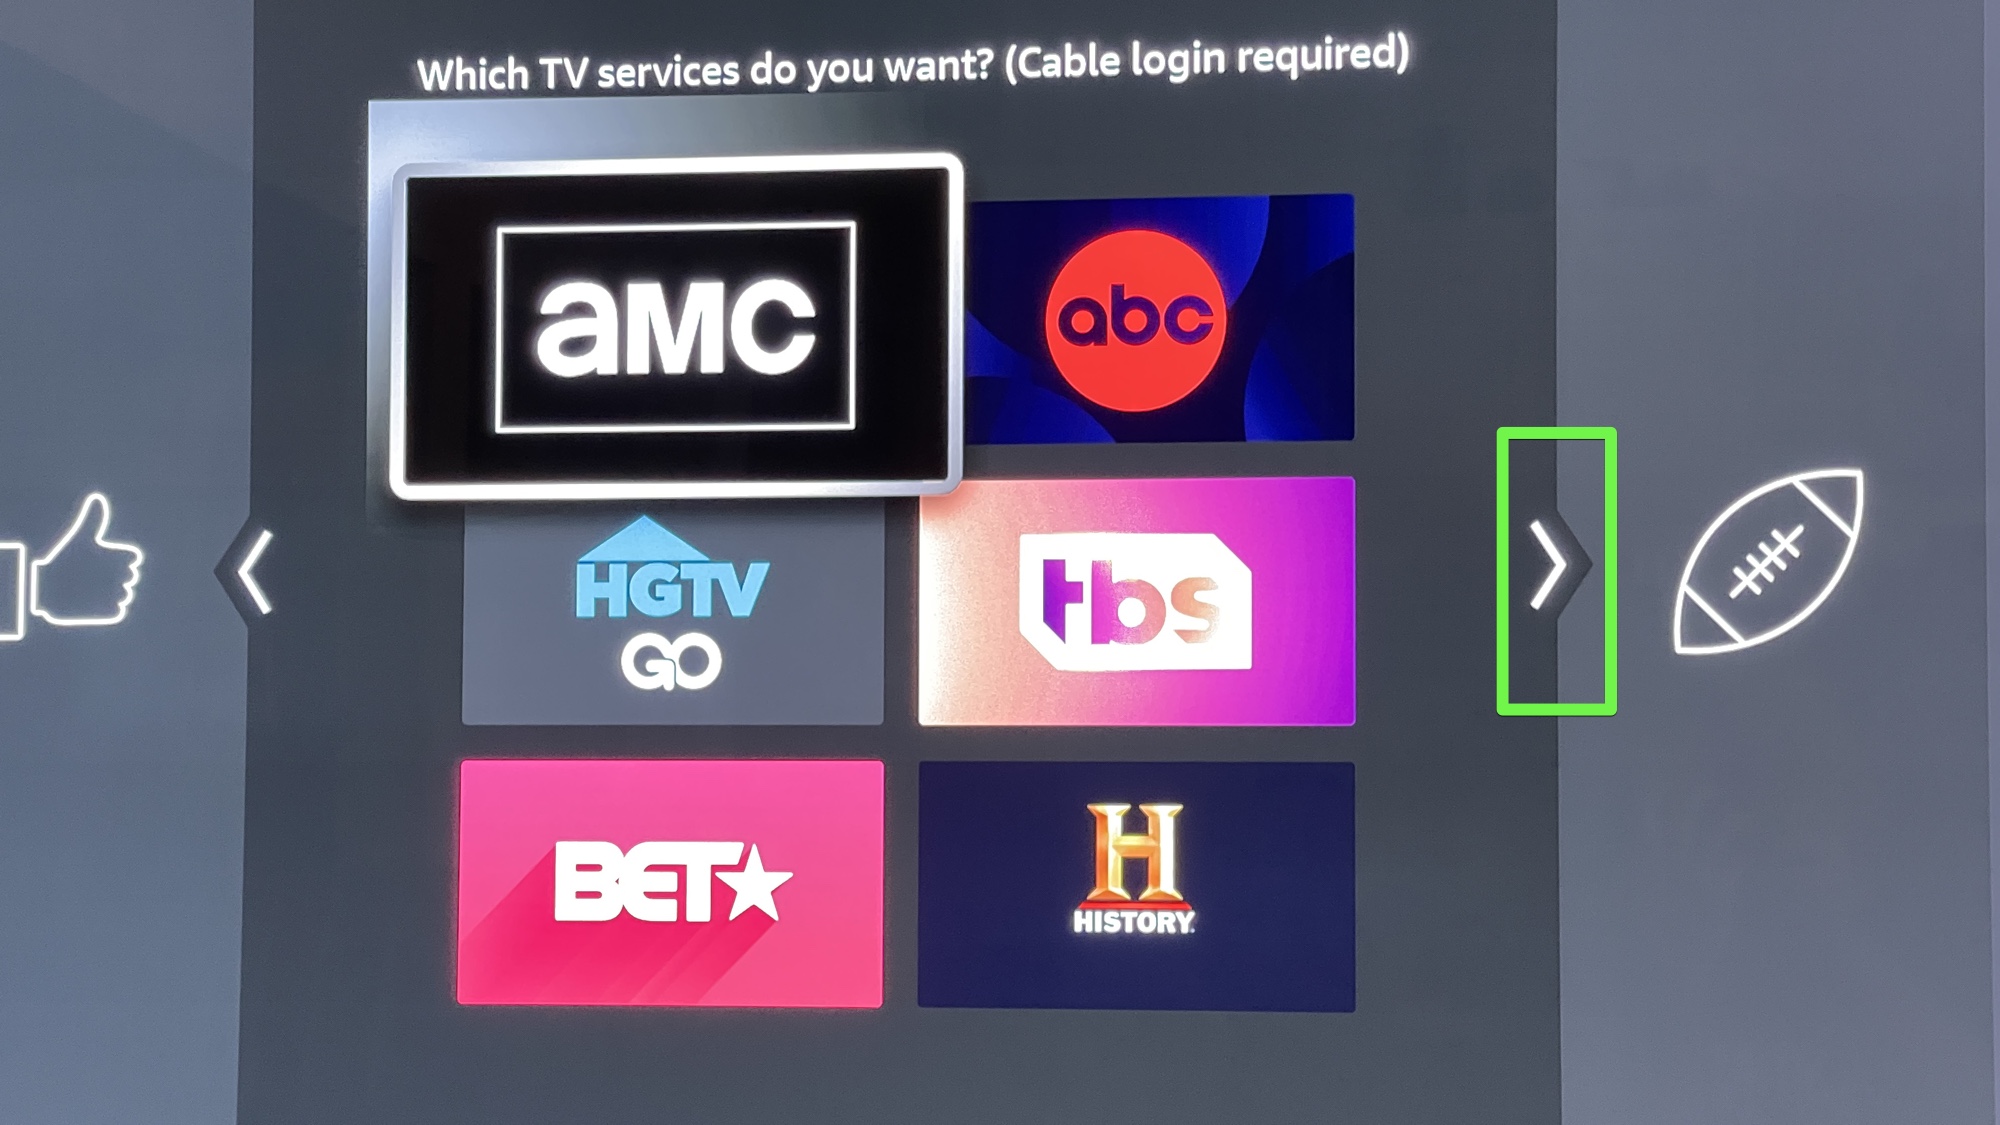 fire tv setup TV Services apps suggestion screen